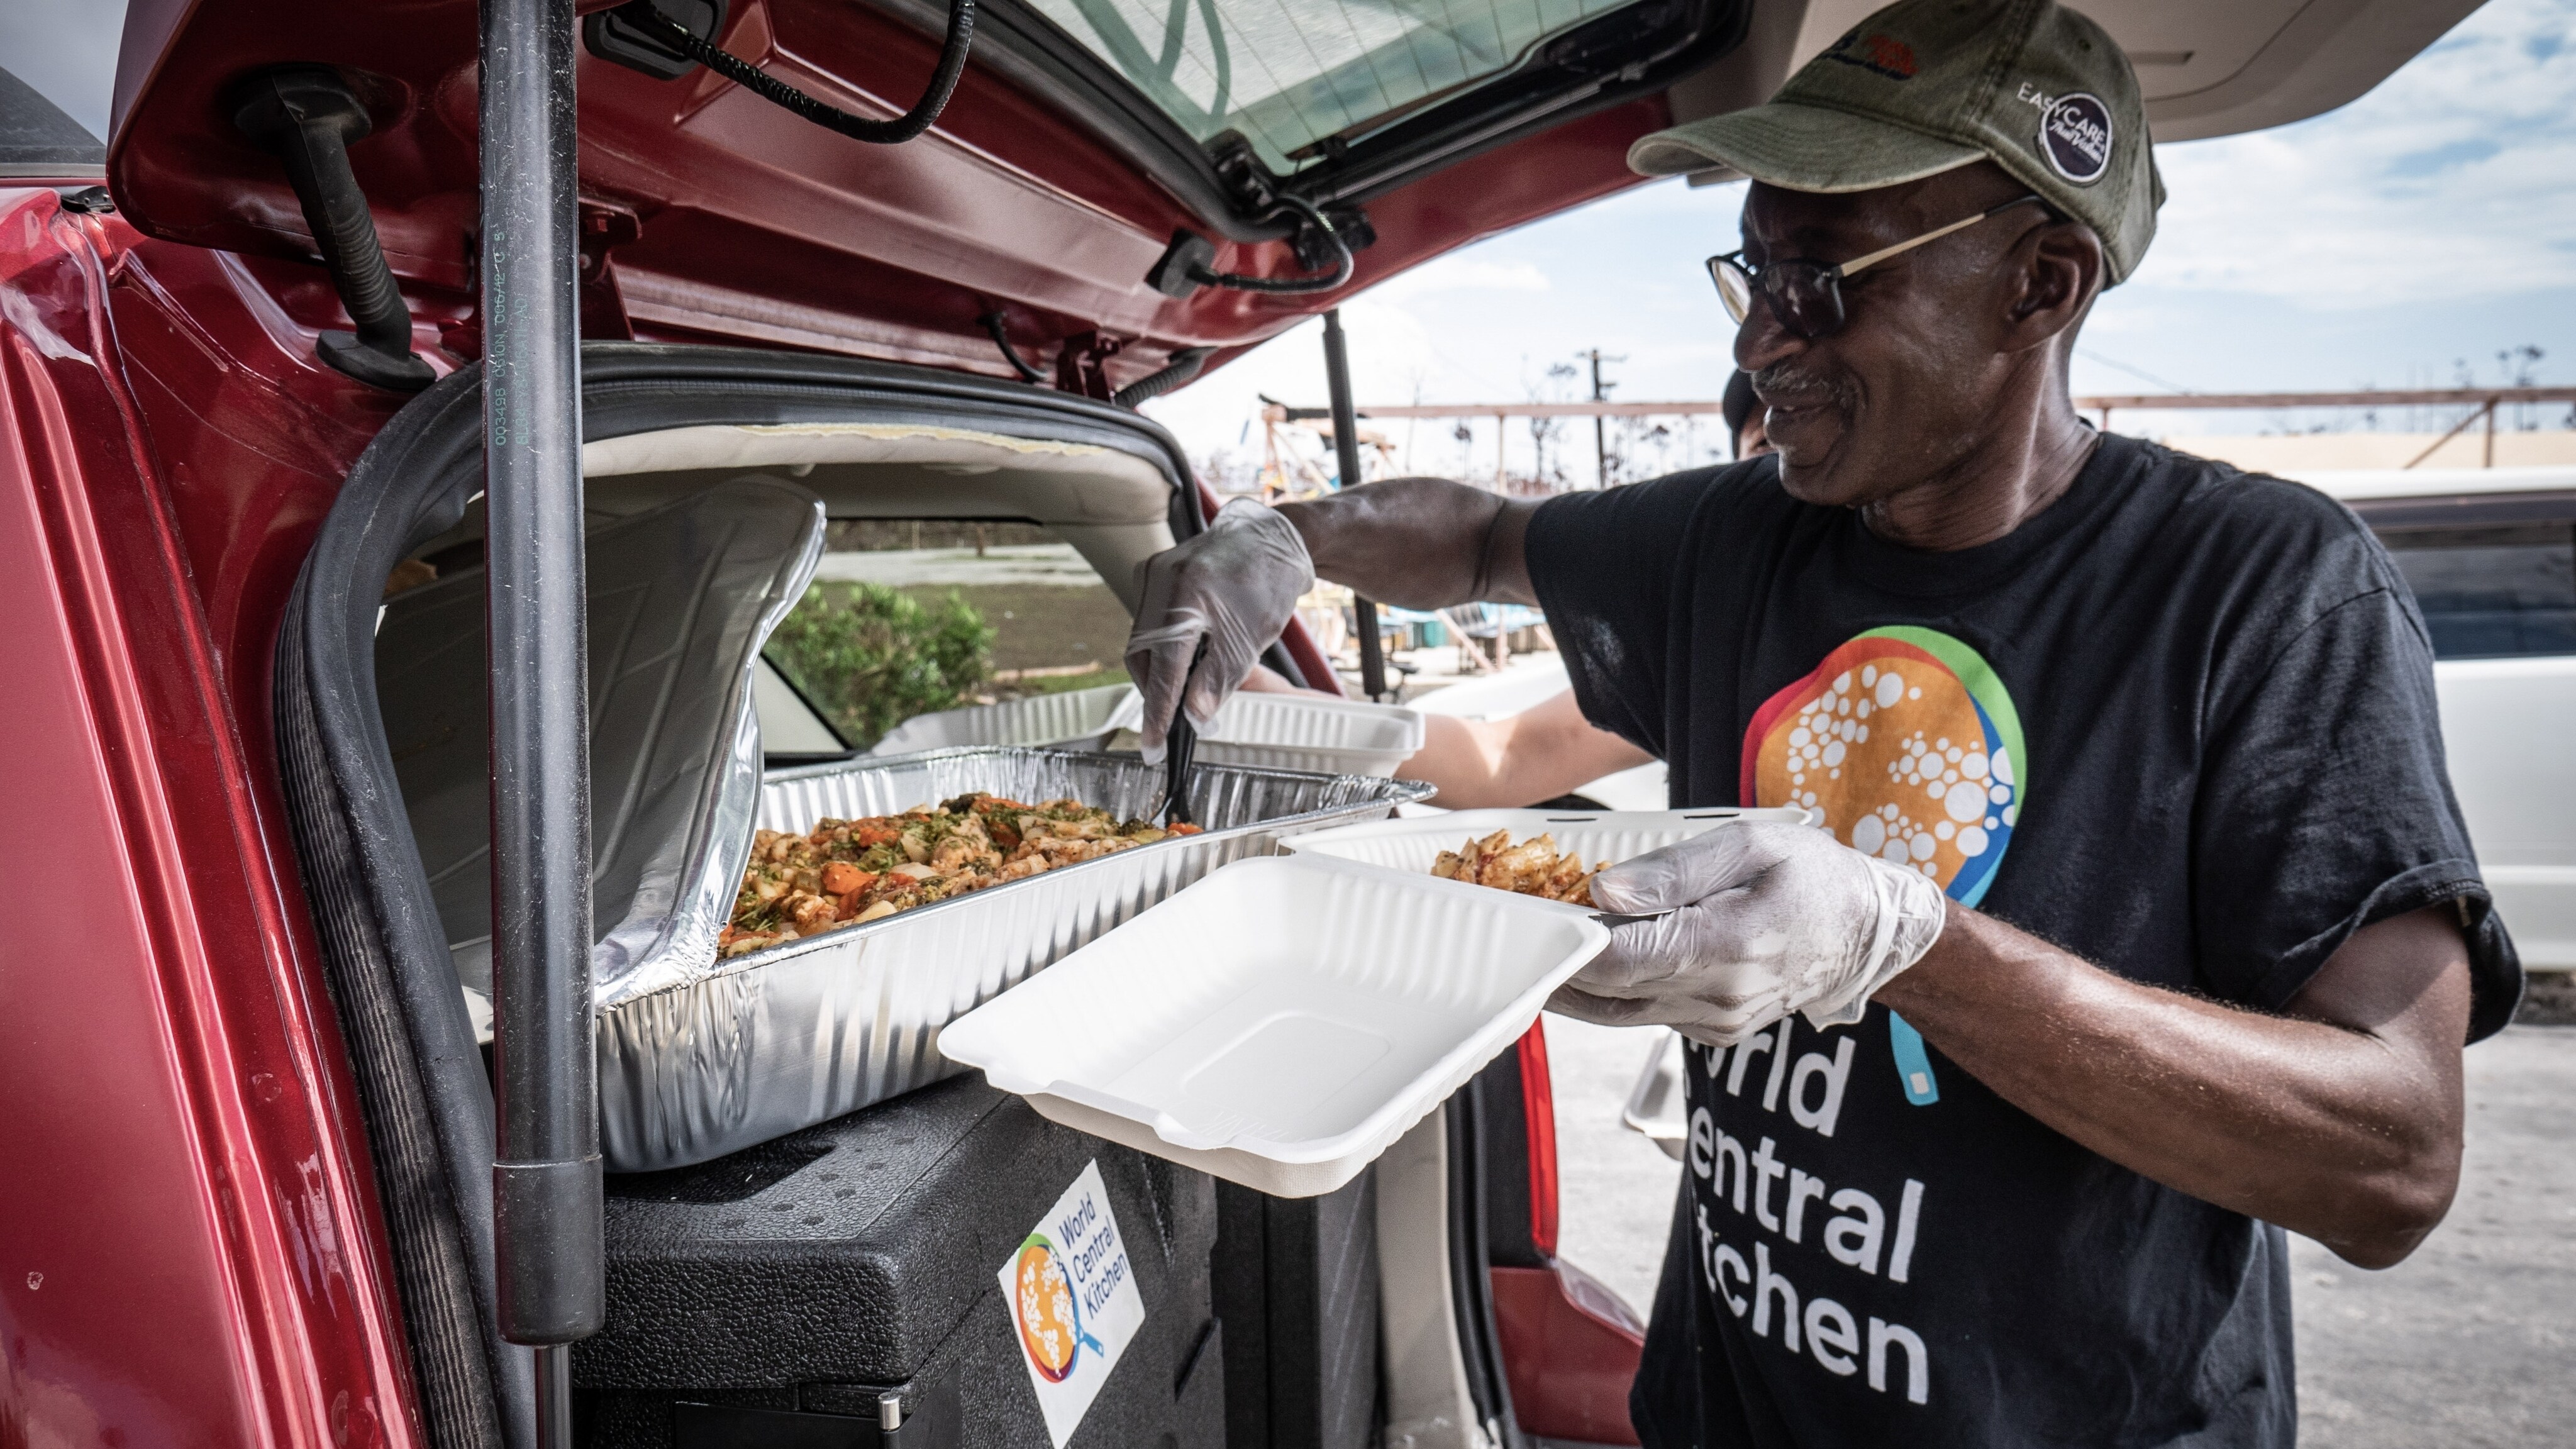 World Central Kitchen volunteer, Kenton Rocker, plates food from the back of a WCK van. (Credit: National Geographic)